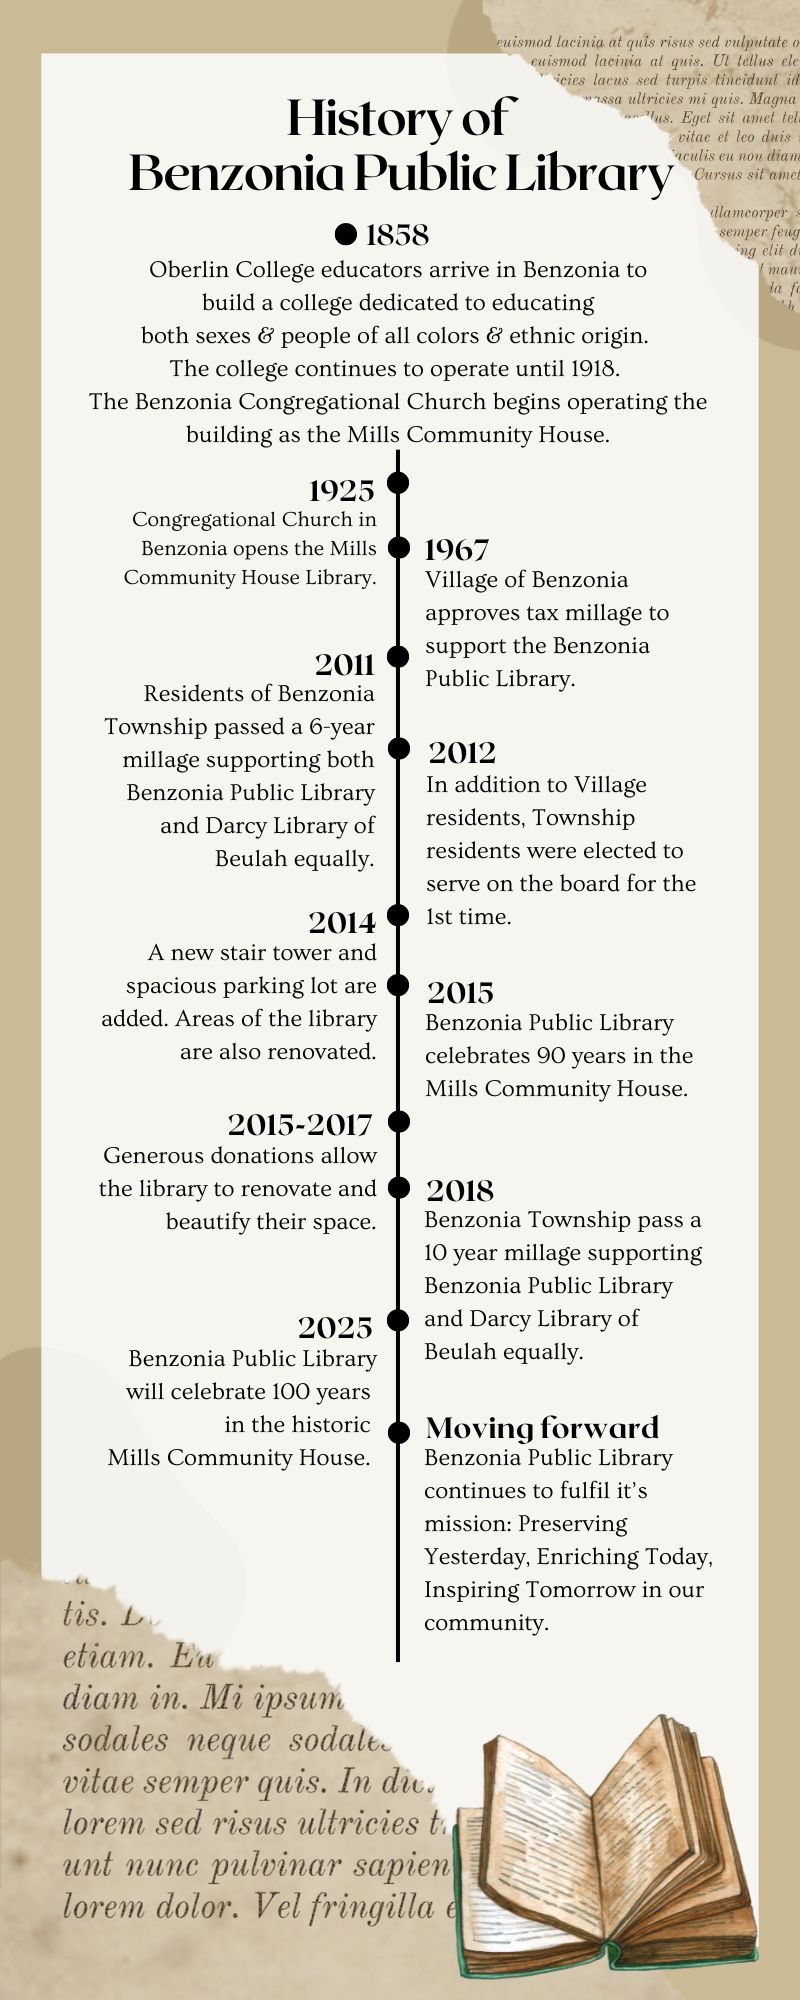 History timeline of Benzonia Public Library